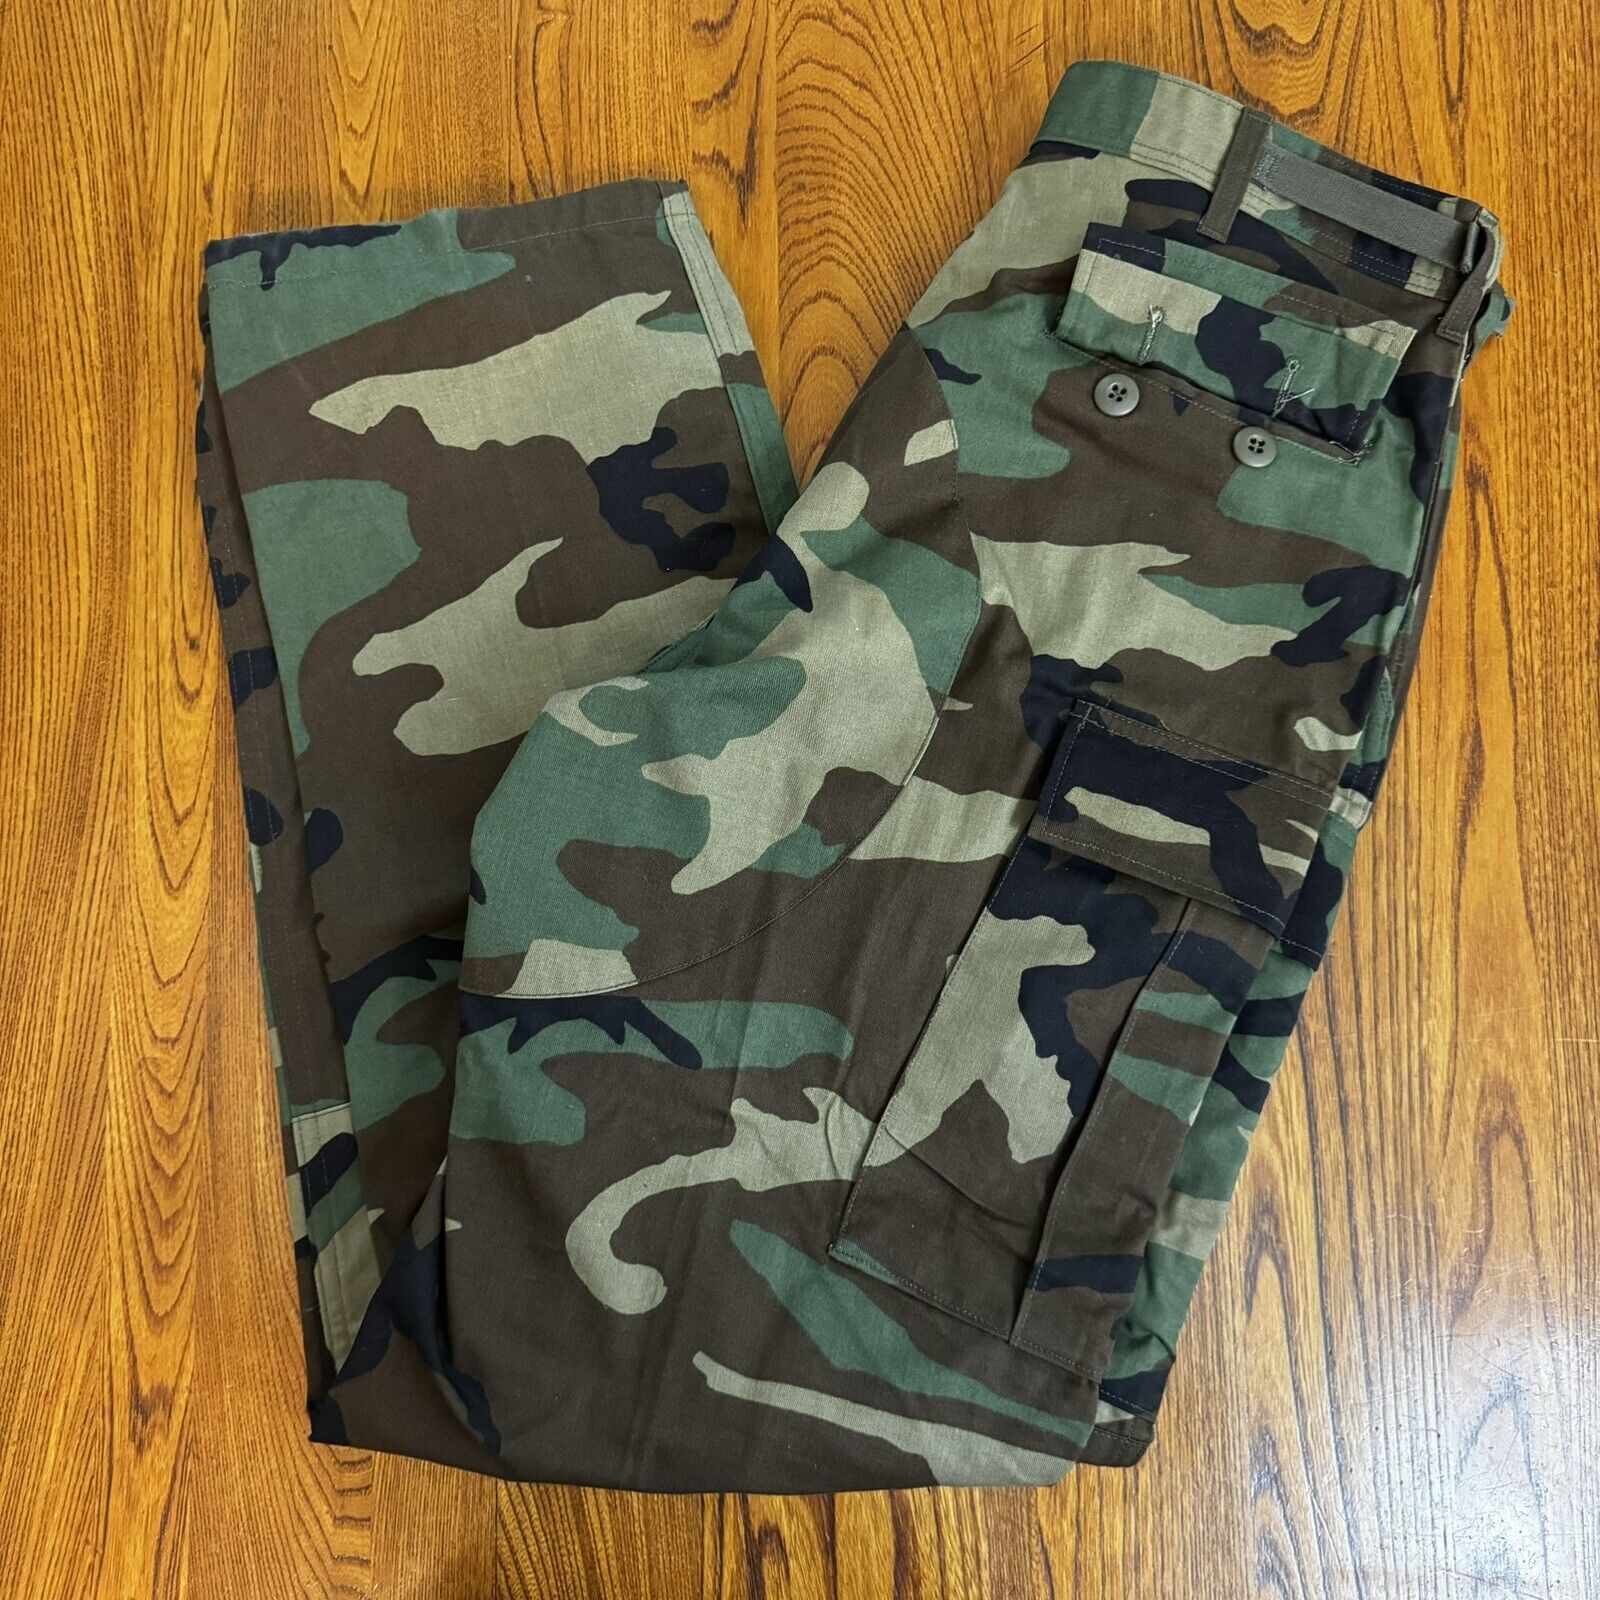 Military Pants Large Regular Woodland Camouflage M81 Combat Trousers US Army BDU